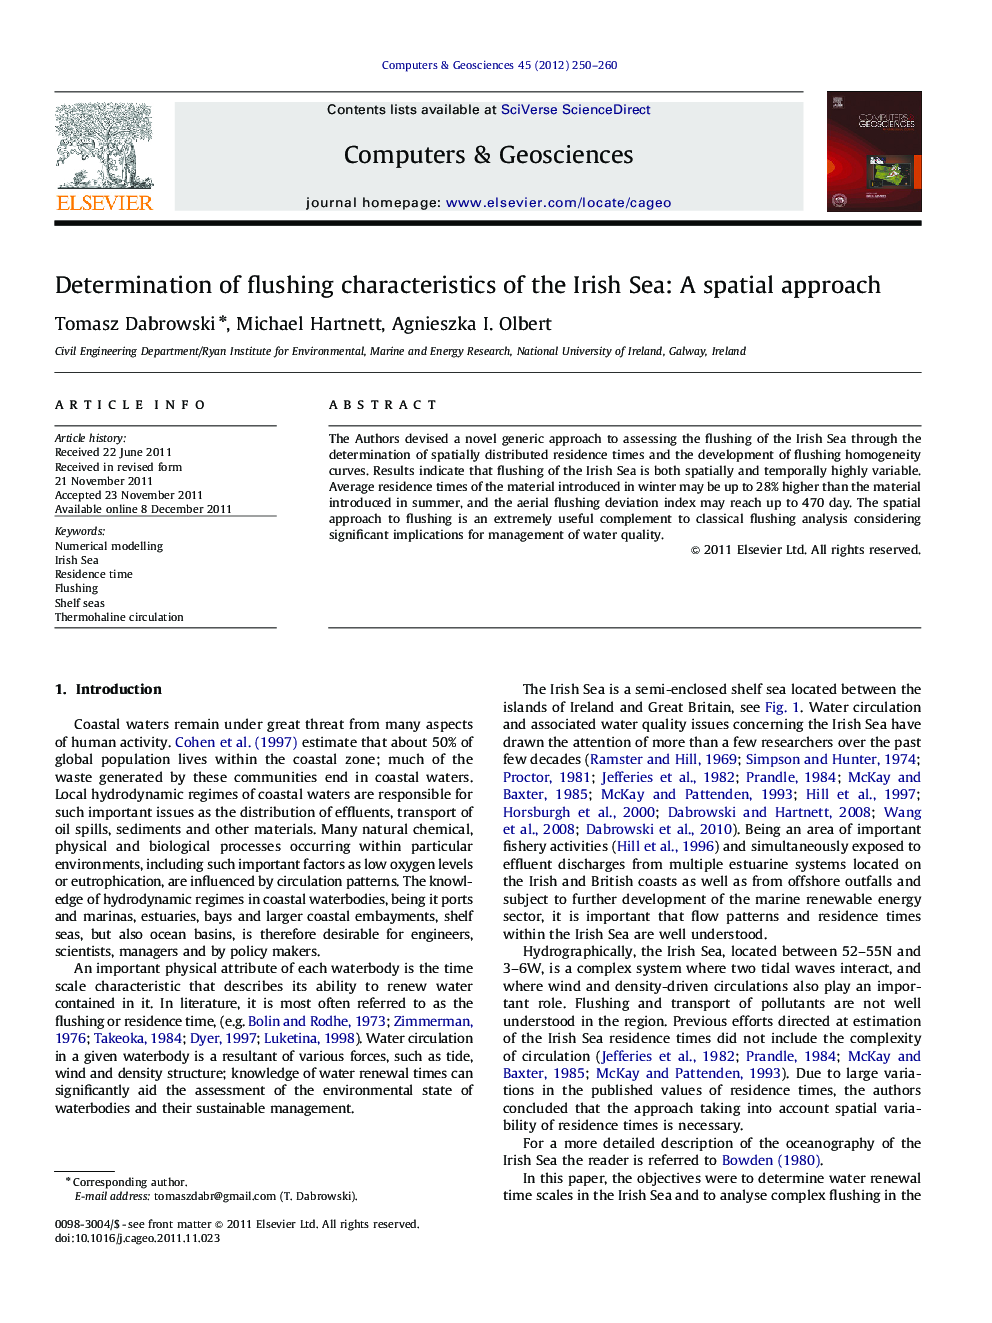 Determination of flushing characteristics of the Irish Sea: A spatial approach